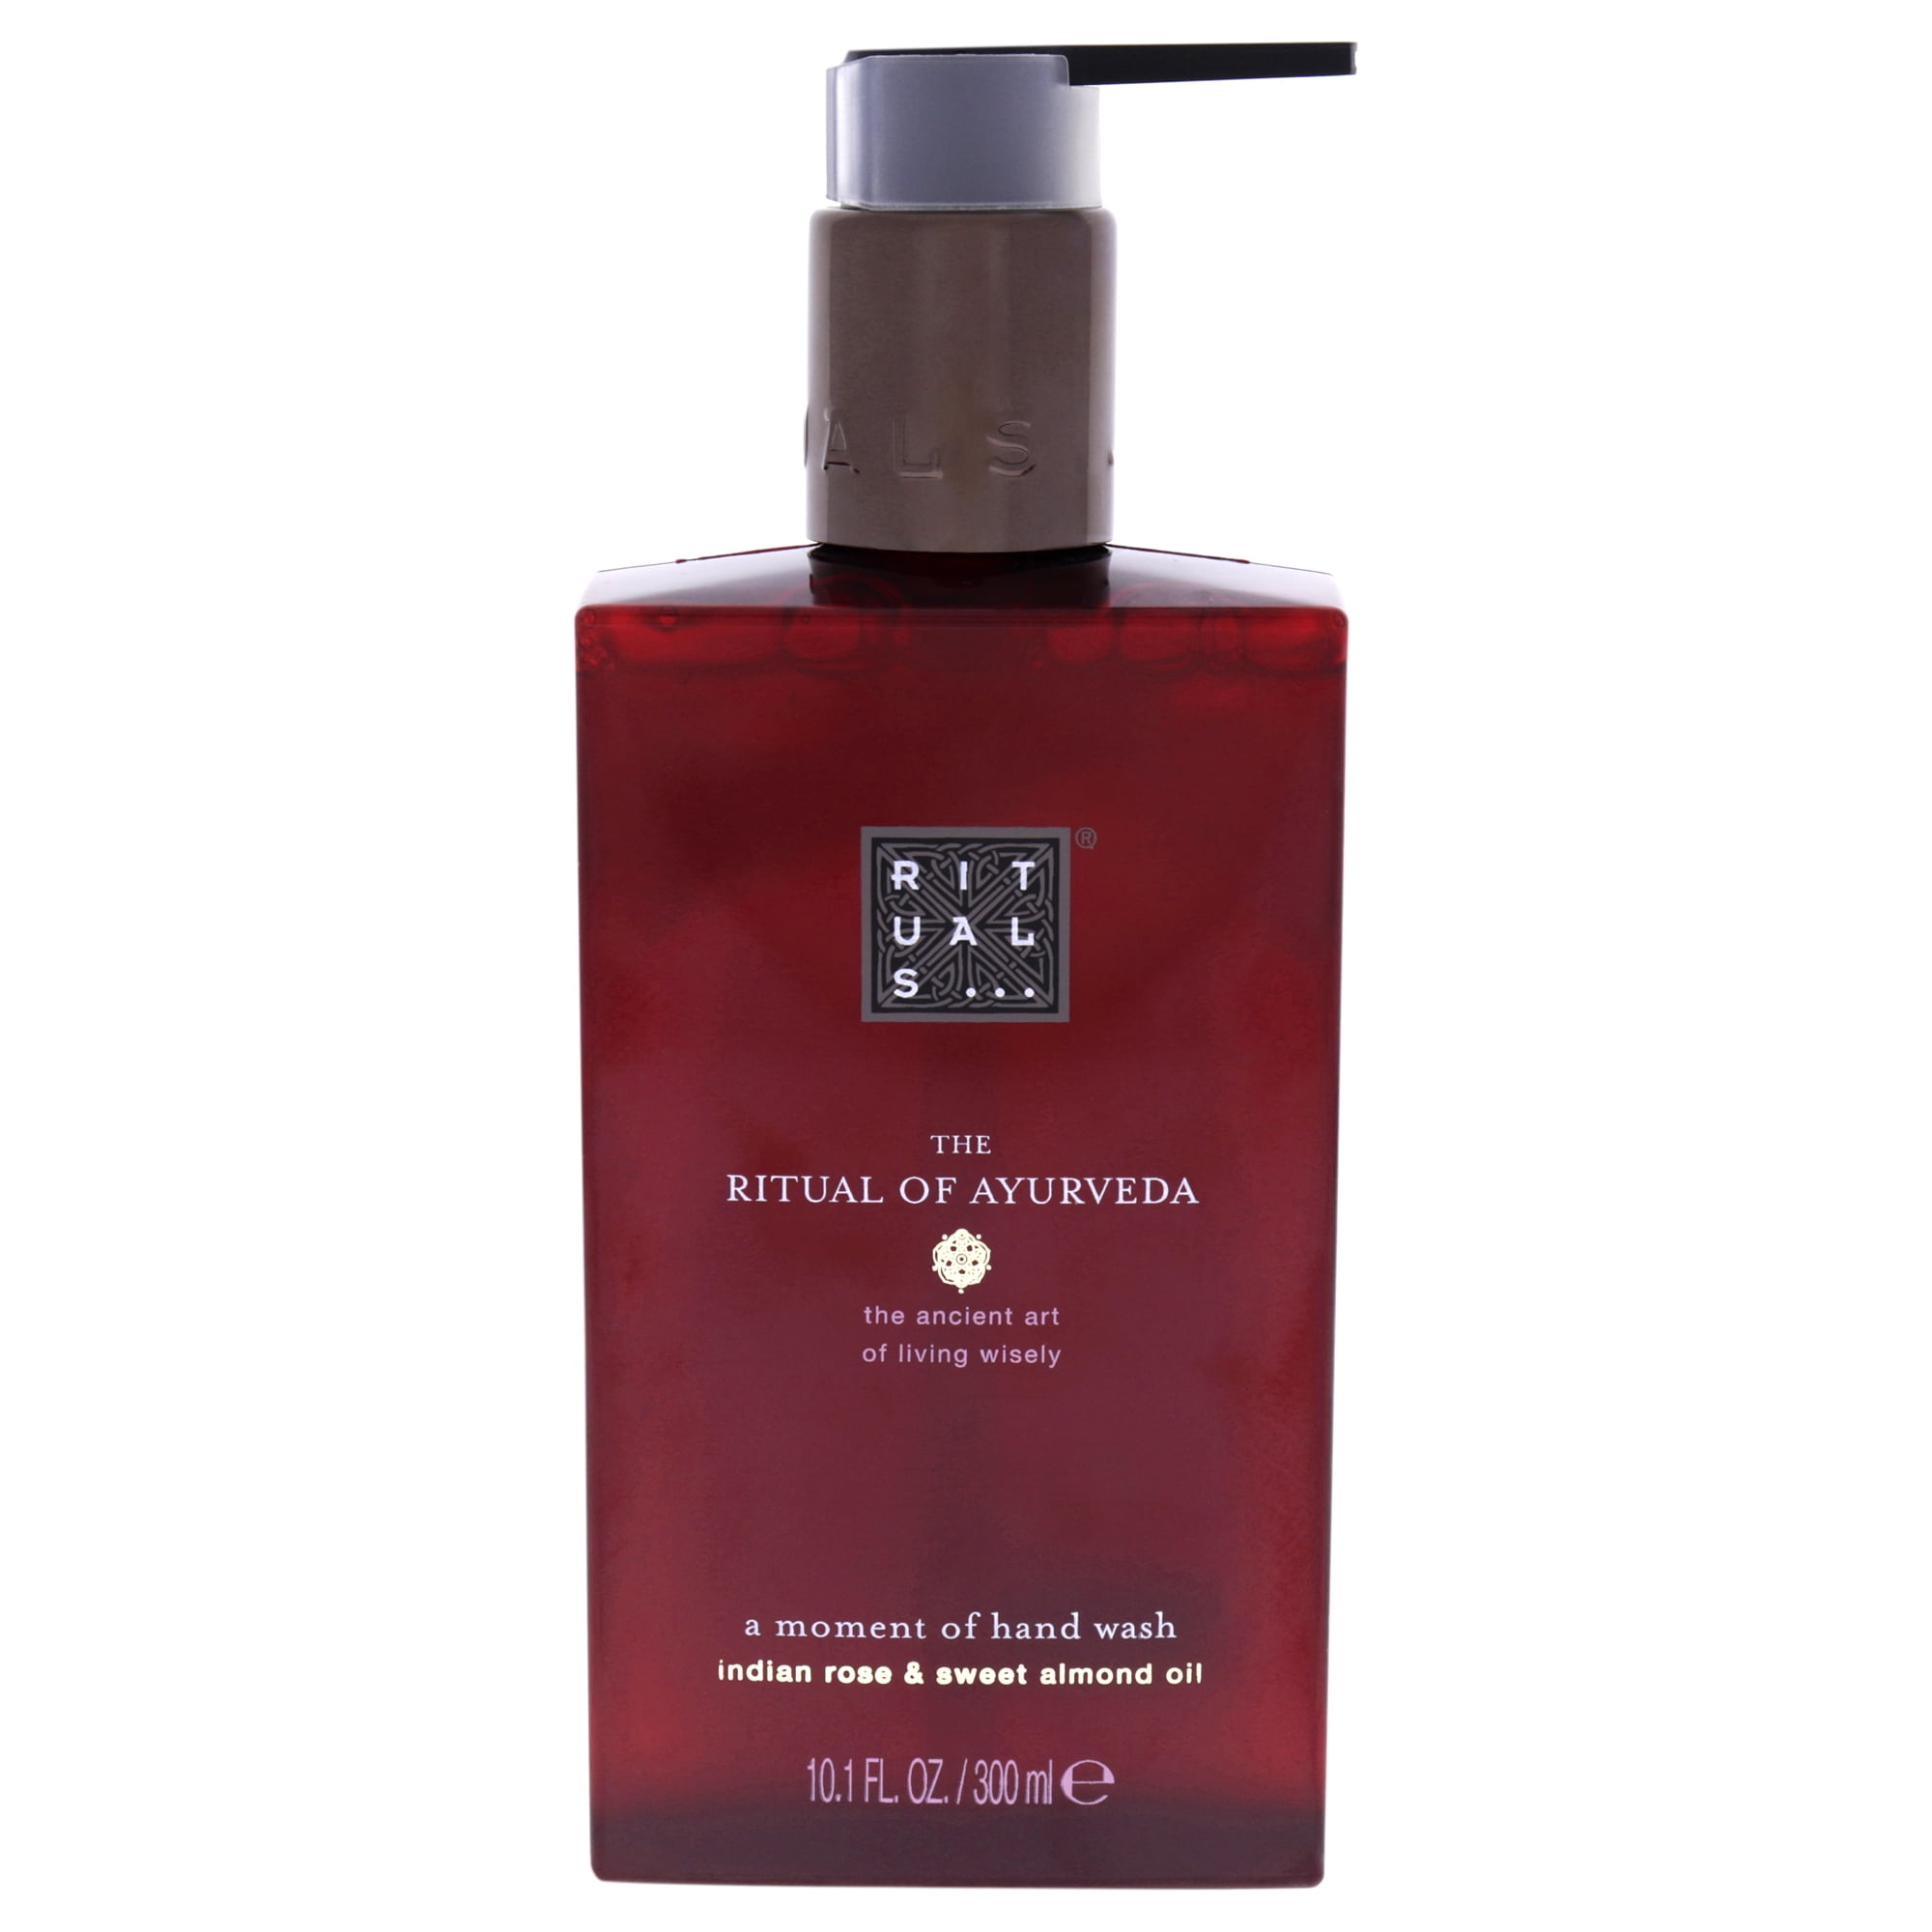 Rituals of Ayurveda Hand Wash for Unisex, 10.1 oz 